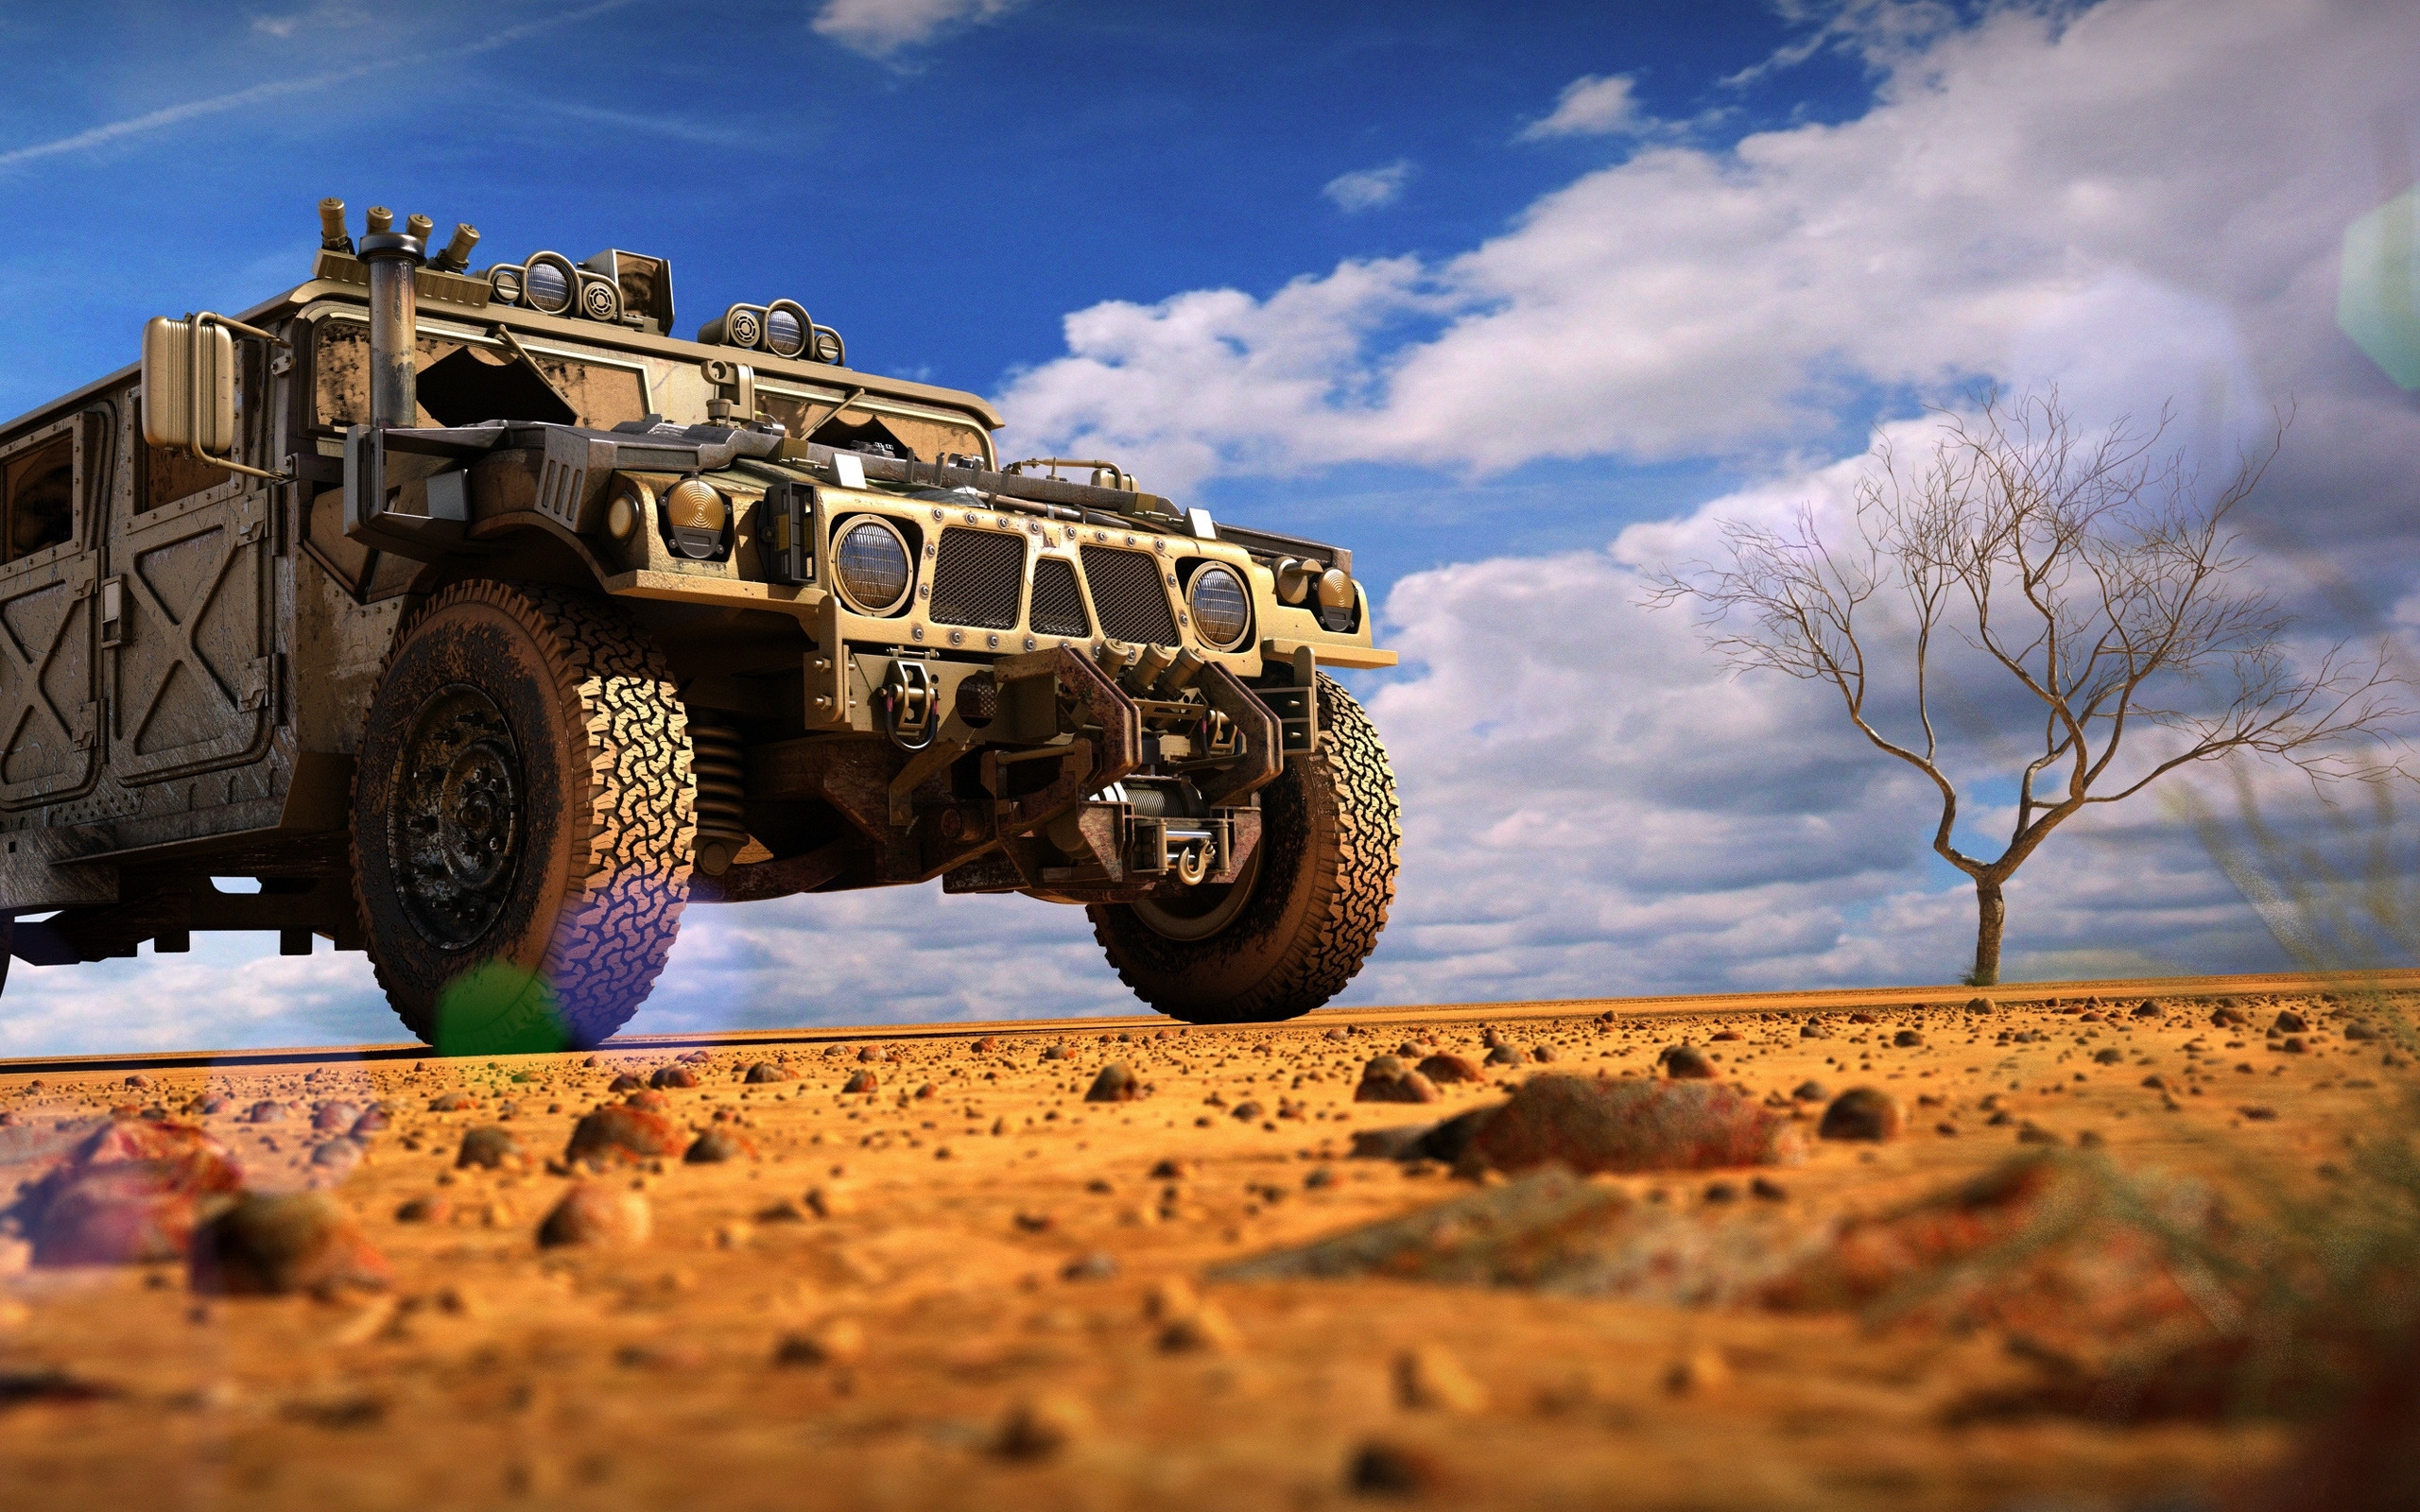 General 2560x1600 military desert vehicle trees clouds outdoors depth of field Humvee military vehicle